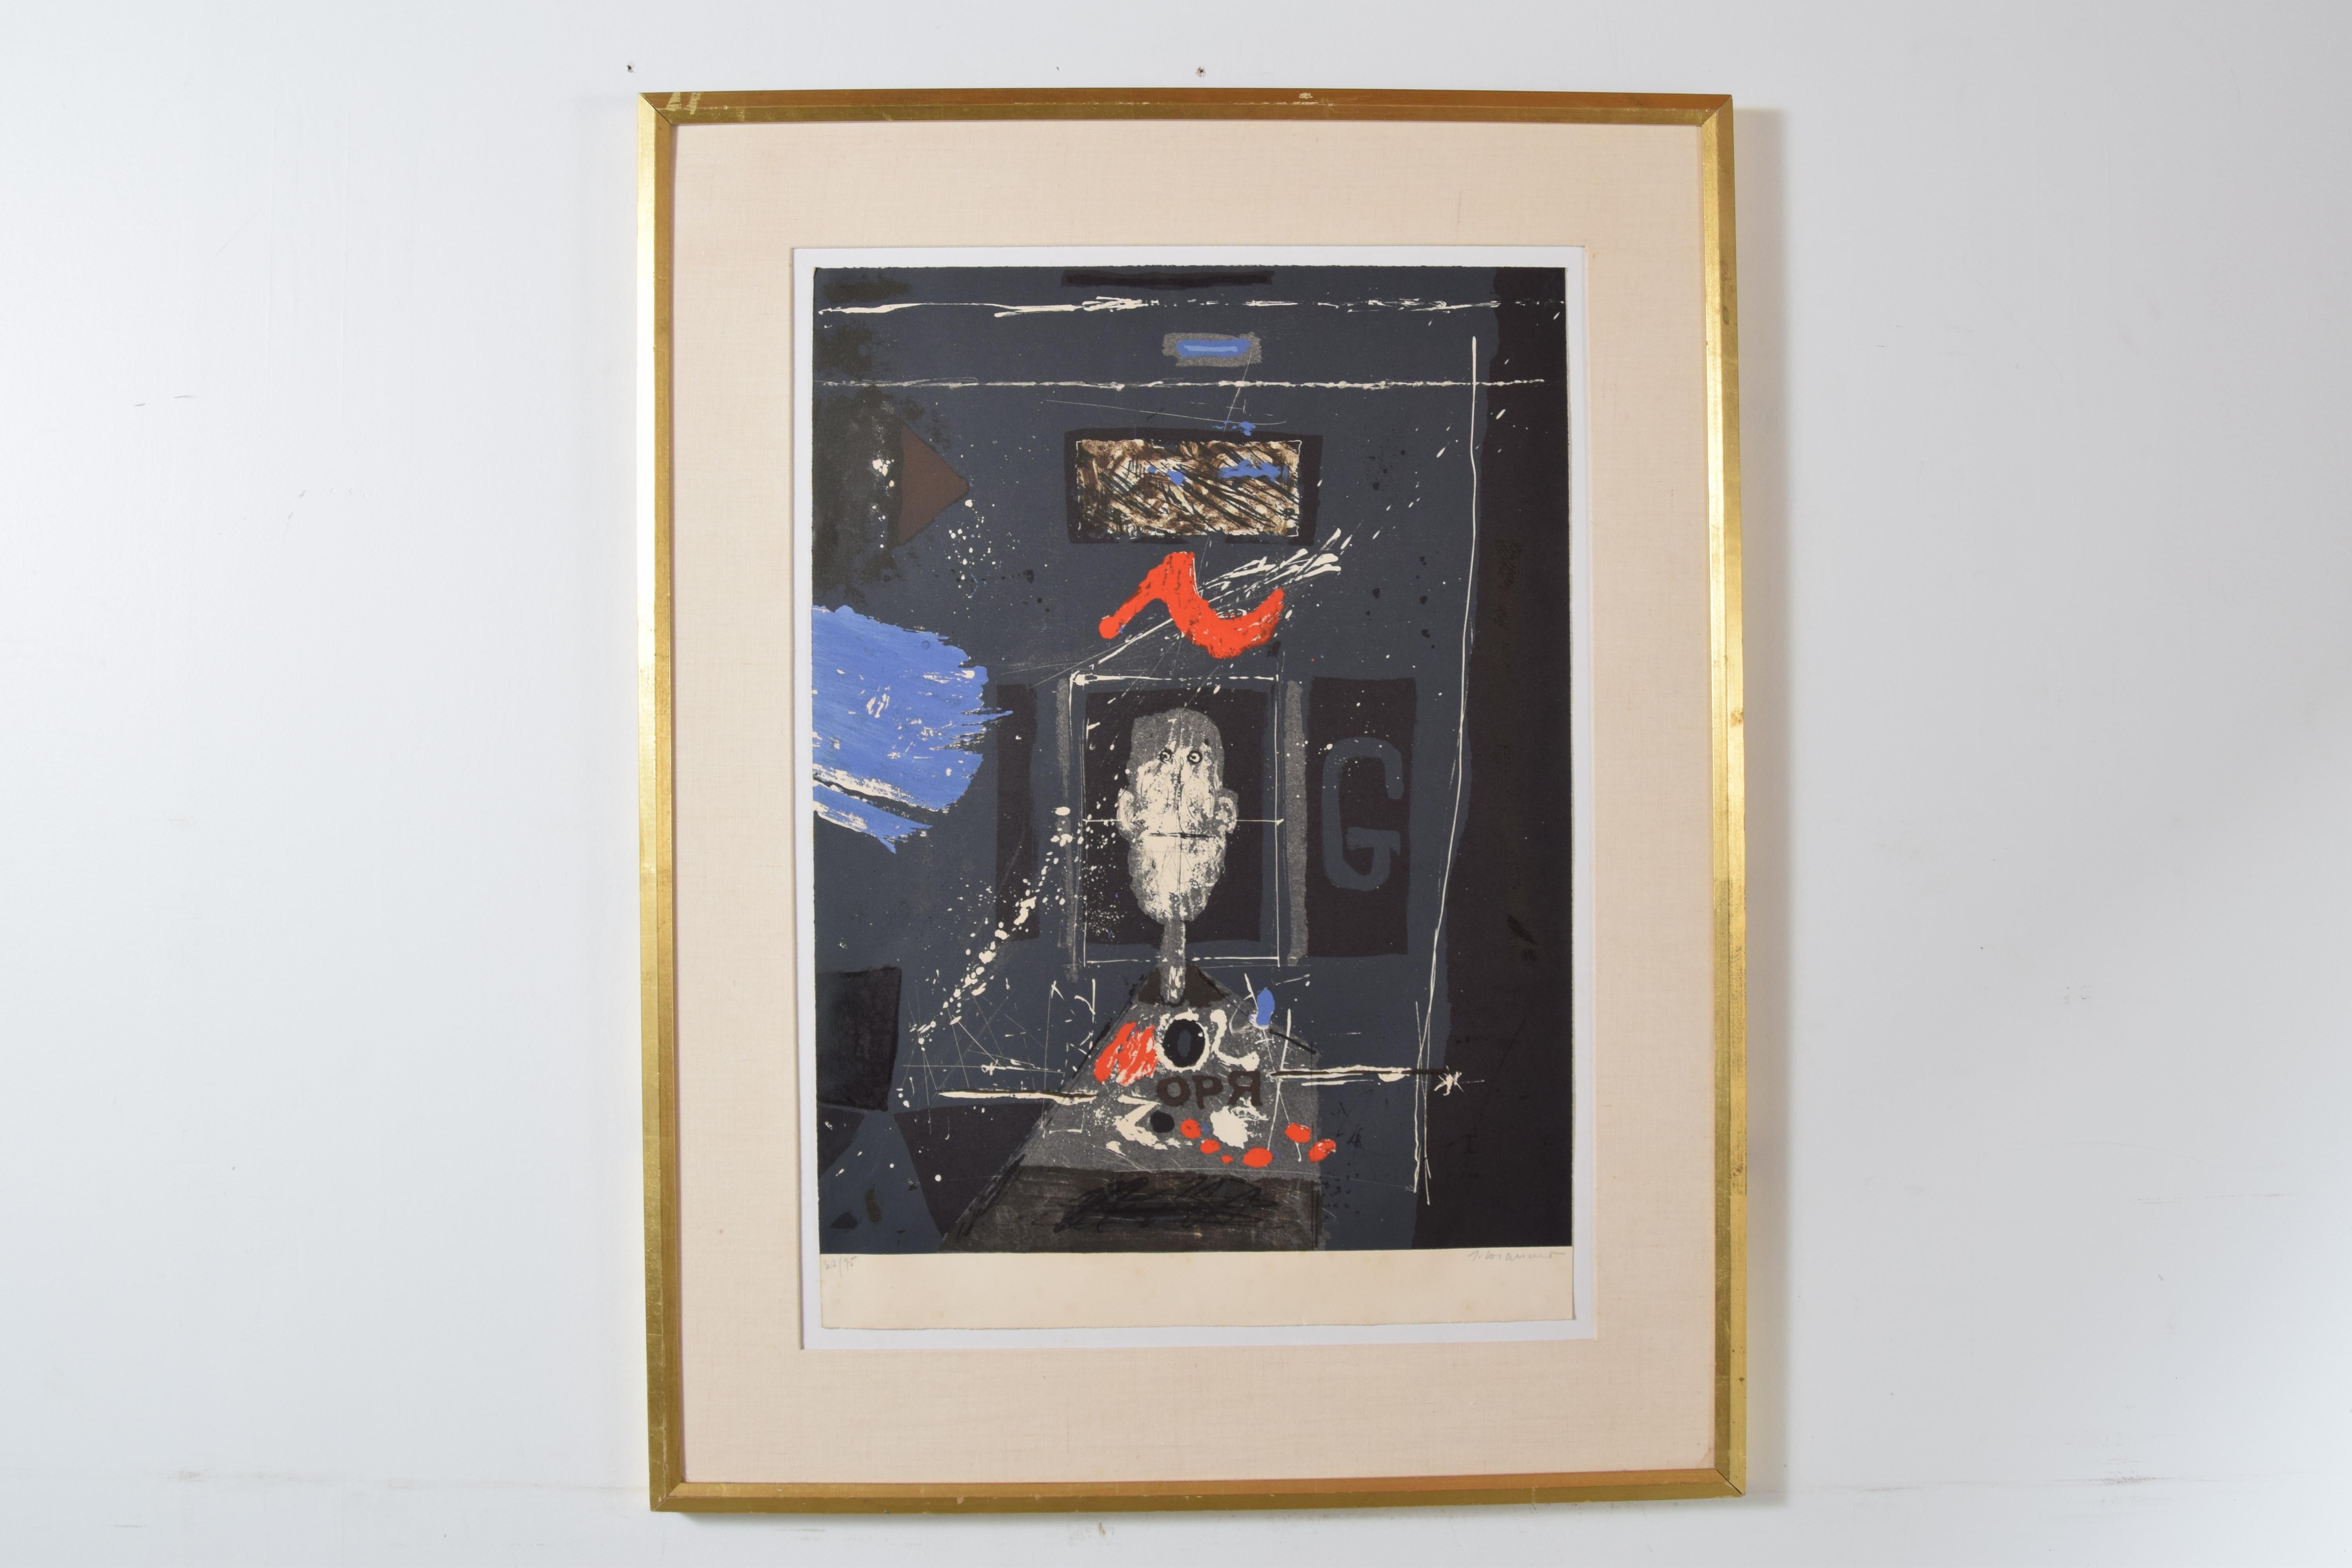 James Coignard (French, 1925–2008)

Nicely framed in gilded frame, linen mat.

Title: Untitled
Edition: Edition: 62/75
Medium:Etching with carborundum and collage on rag paper
Measurements: 37 1/8